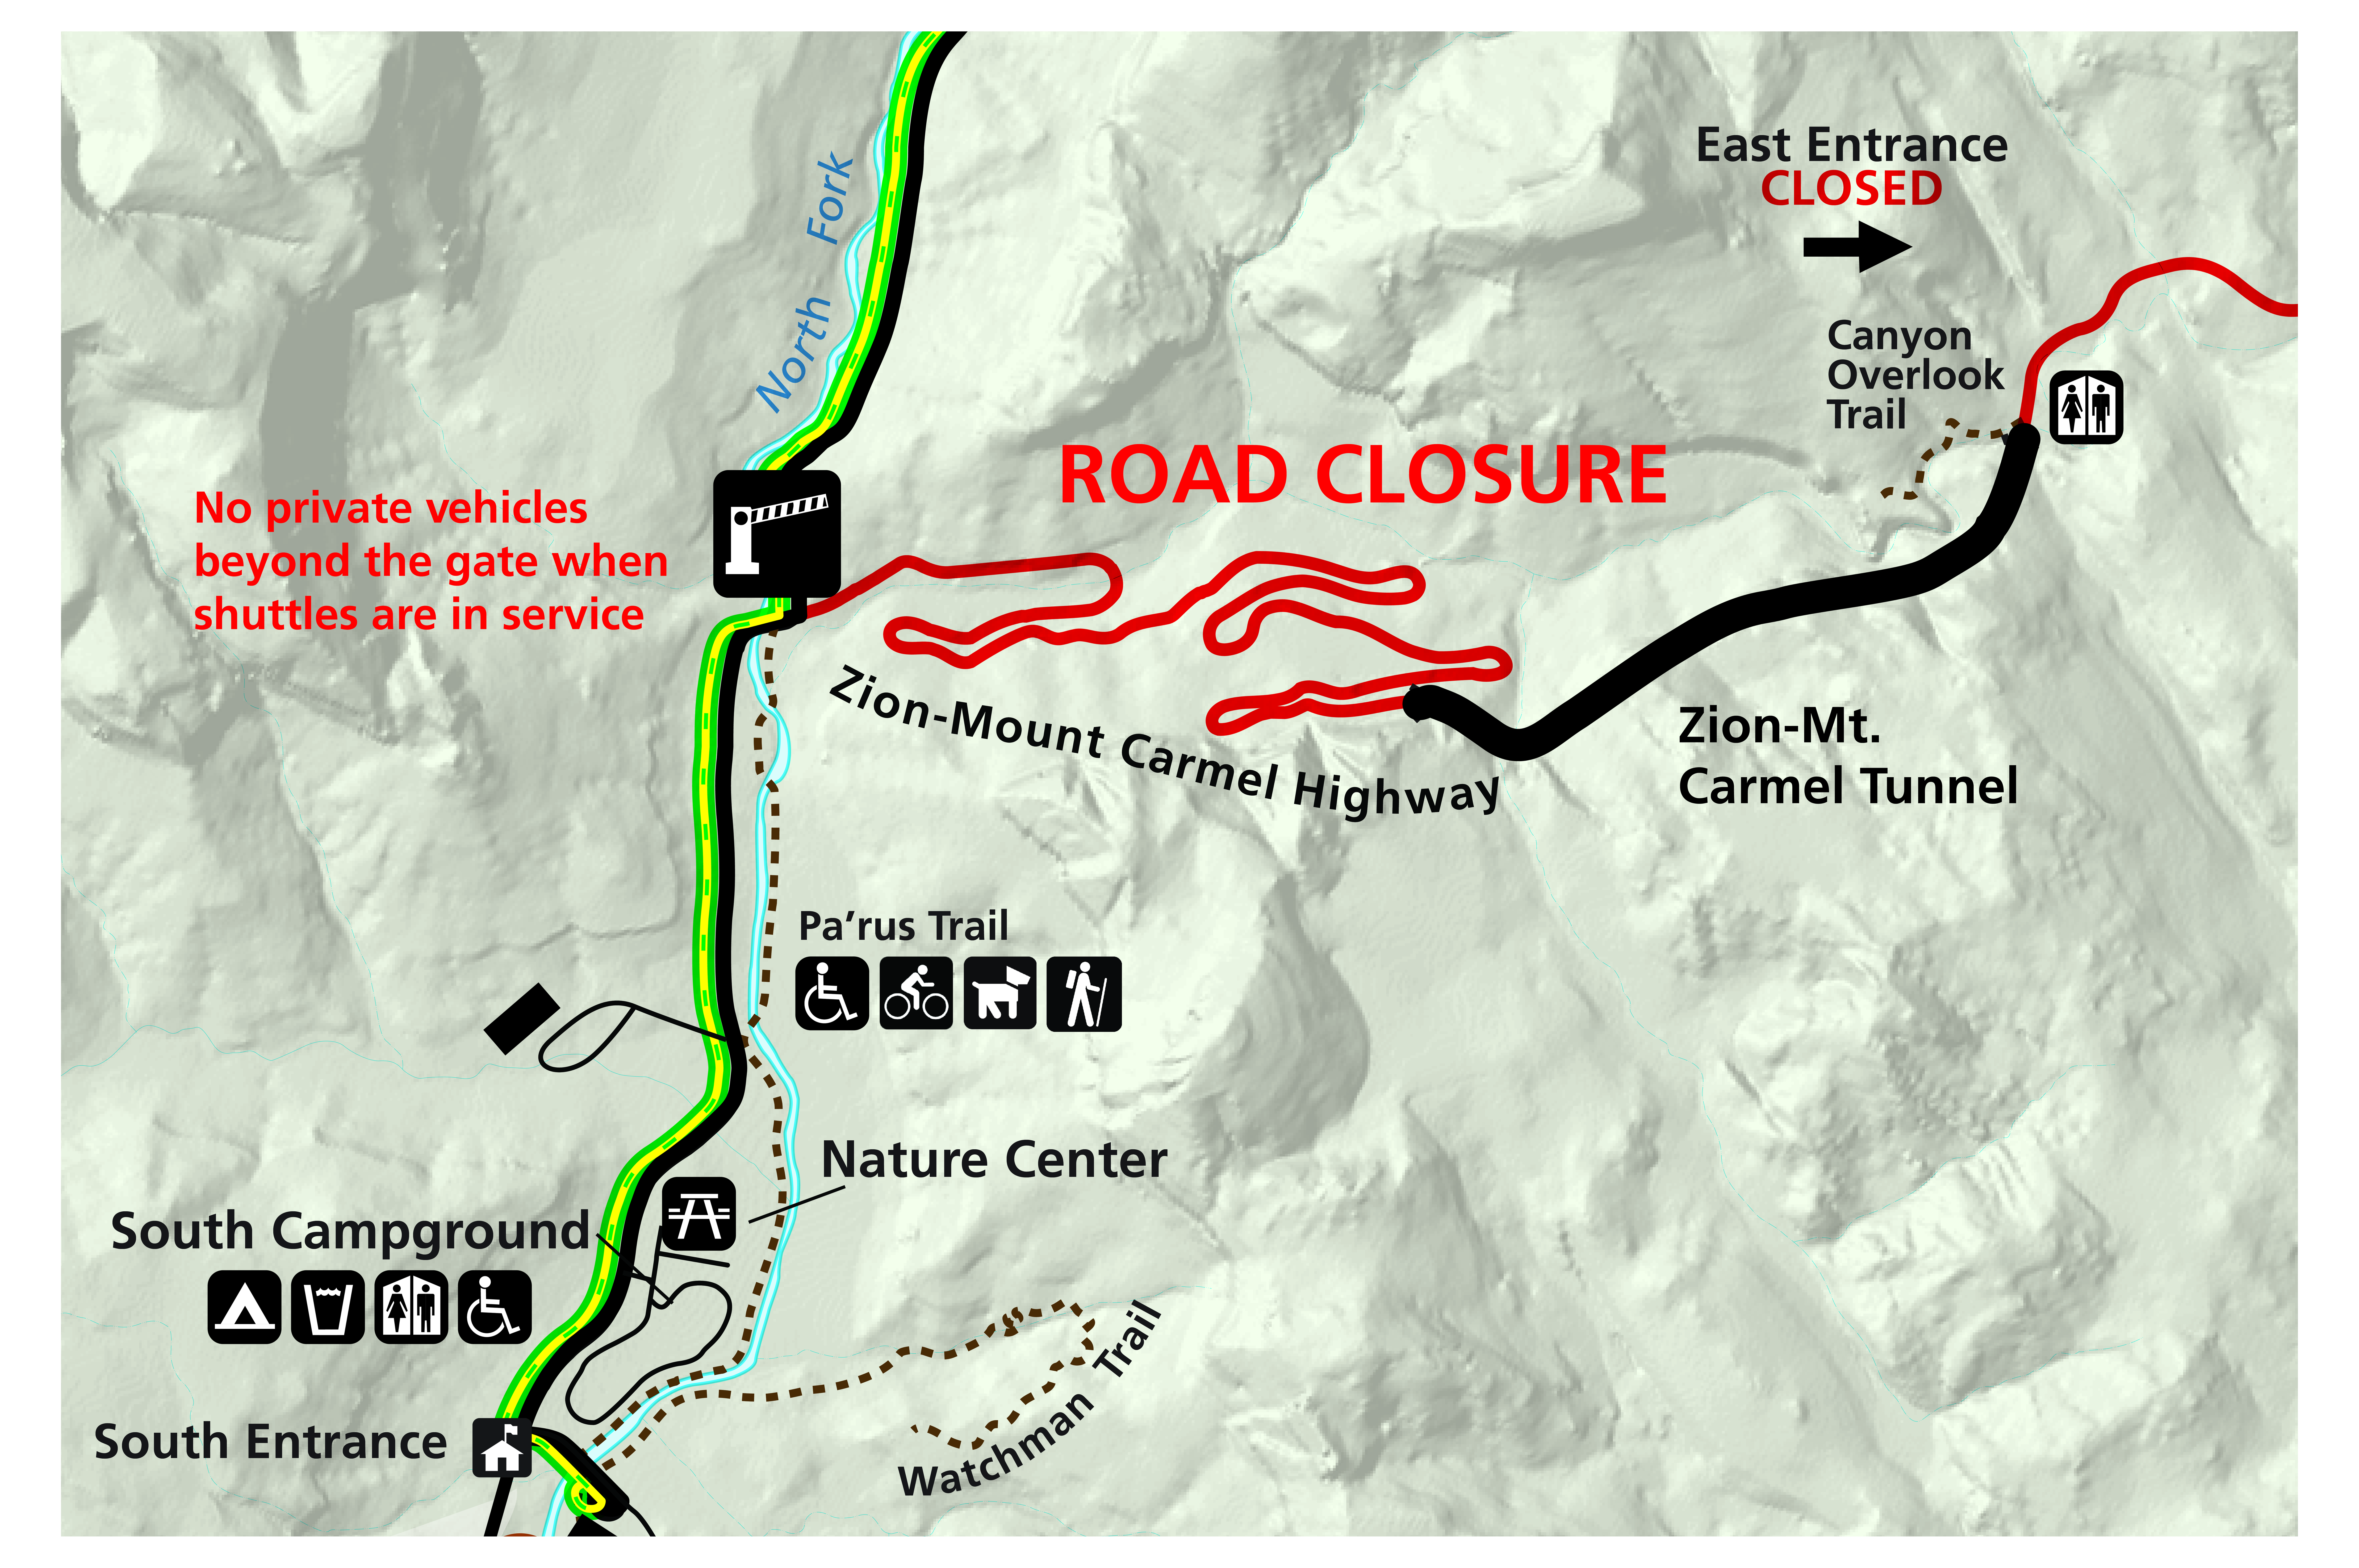 Map showing road closure between Canyon Junction and East Entrance